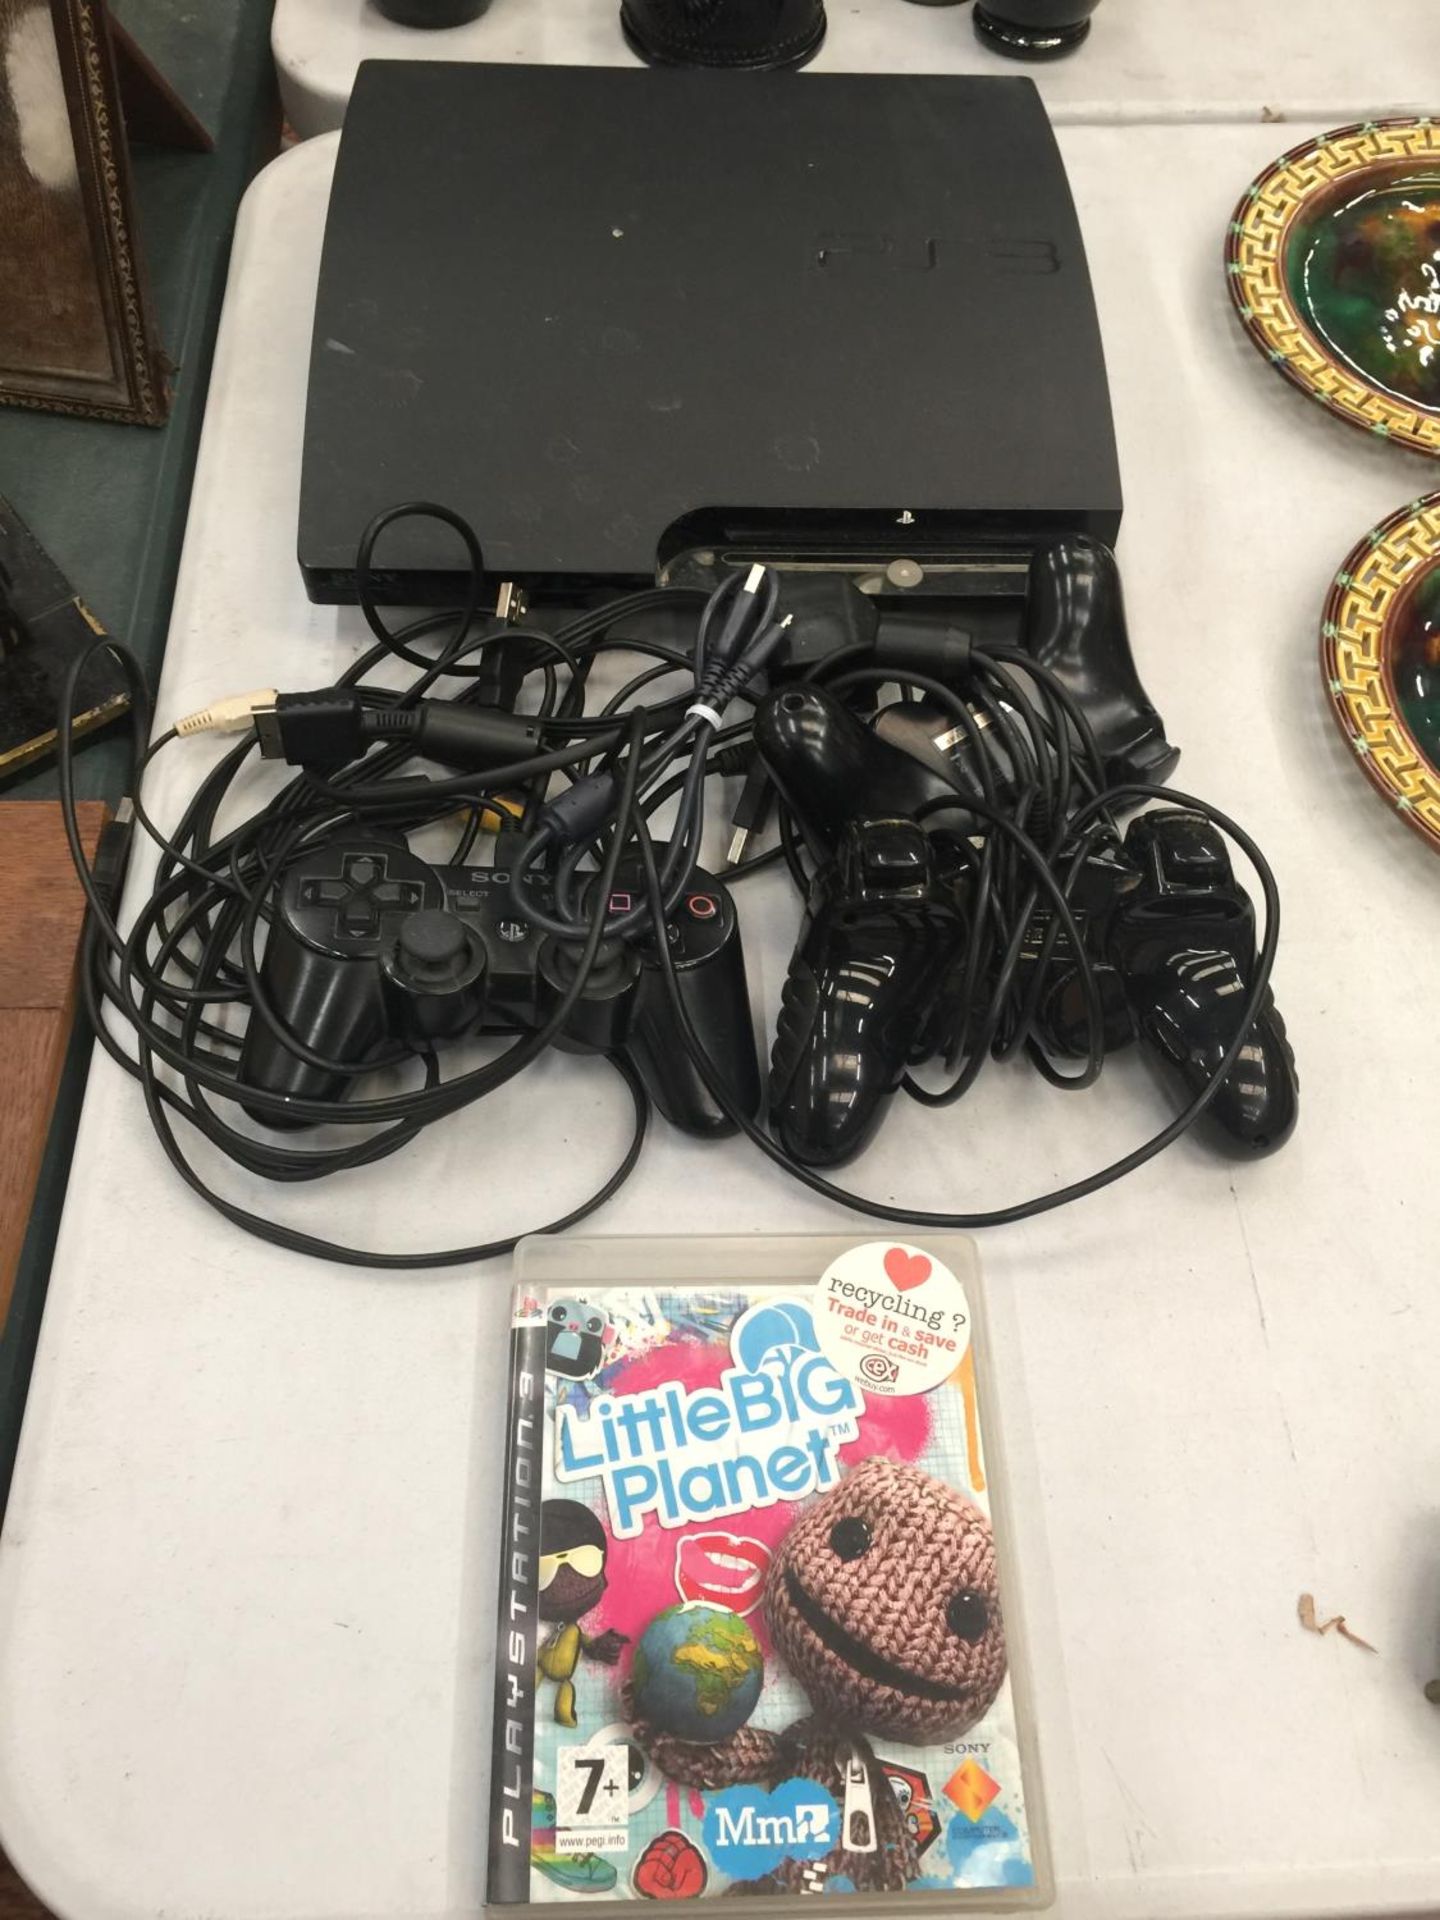 A PLAYSTATION 3 WITH THREE CONTROLLERS AND LITTLE BIG PLANET GAME